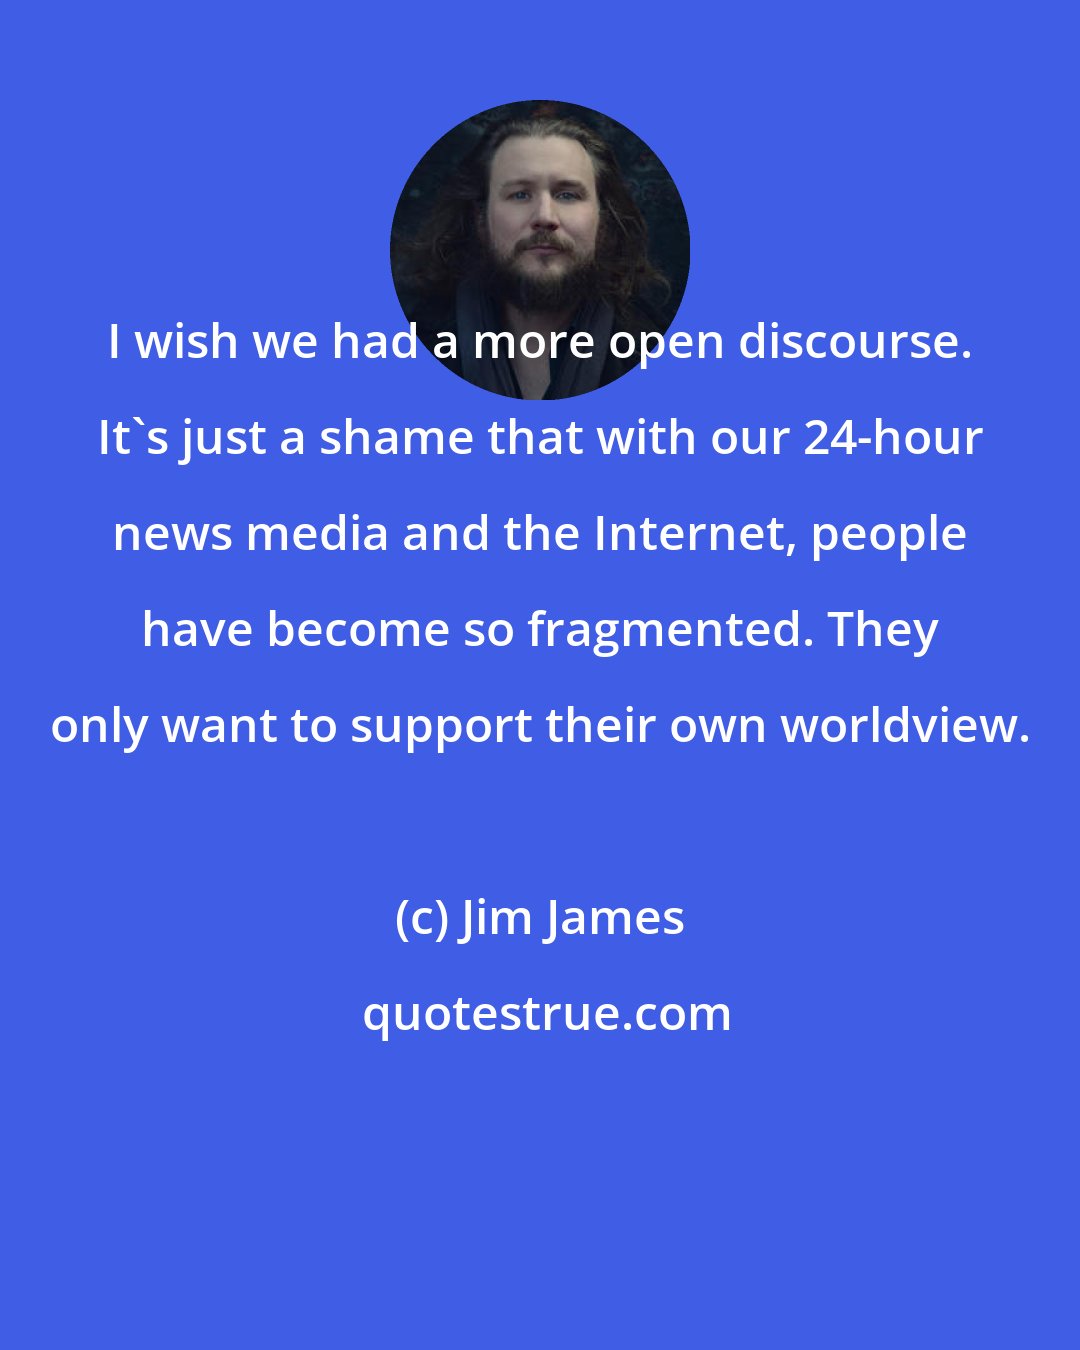 Jim James: I wish we had a more open discourse. It's just a shame that with our 24-hour news media and the Internet, people have become so fragmented. They only want to support their own worldview.